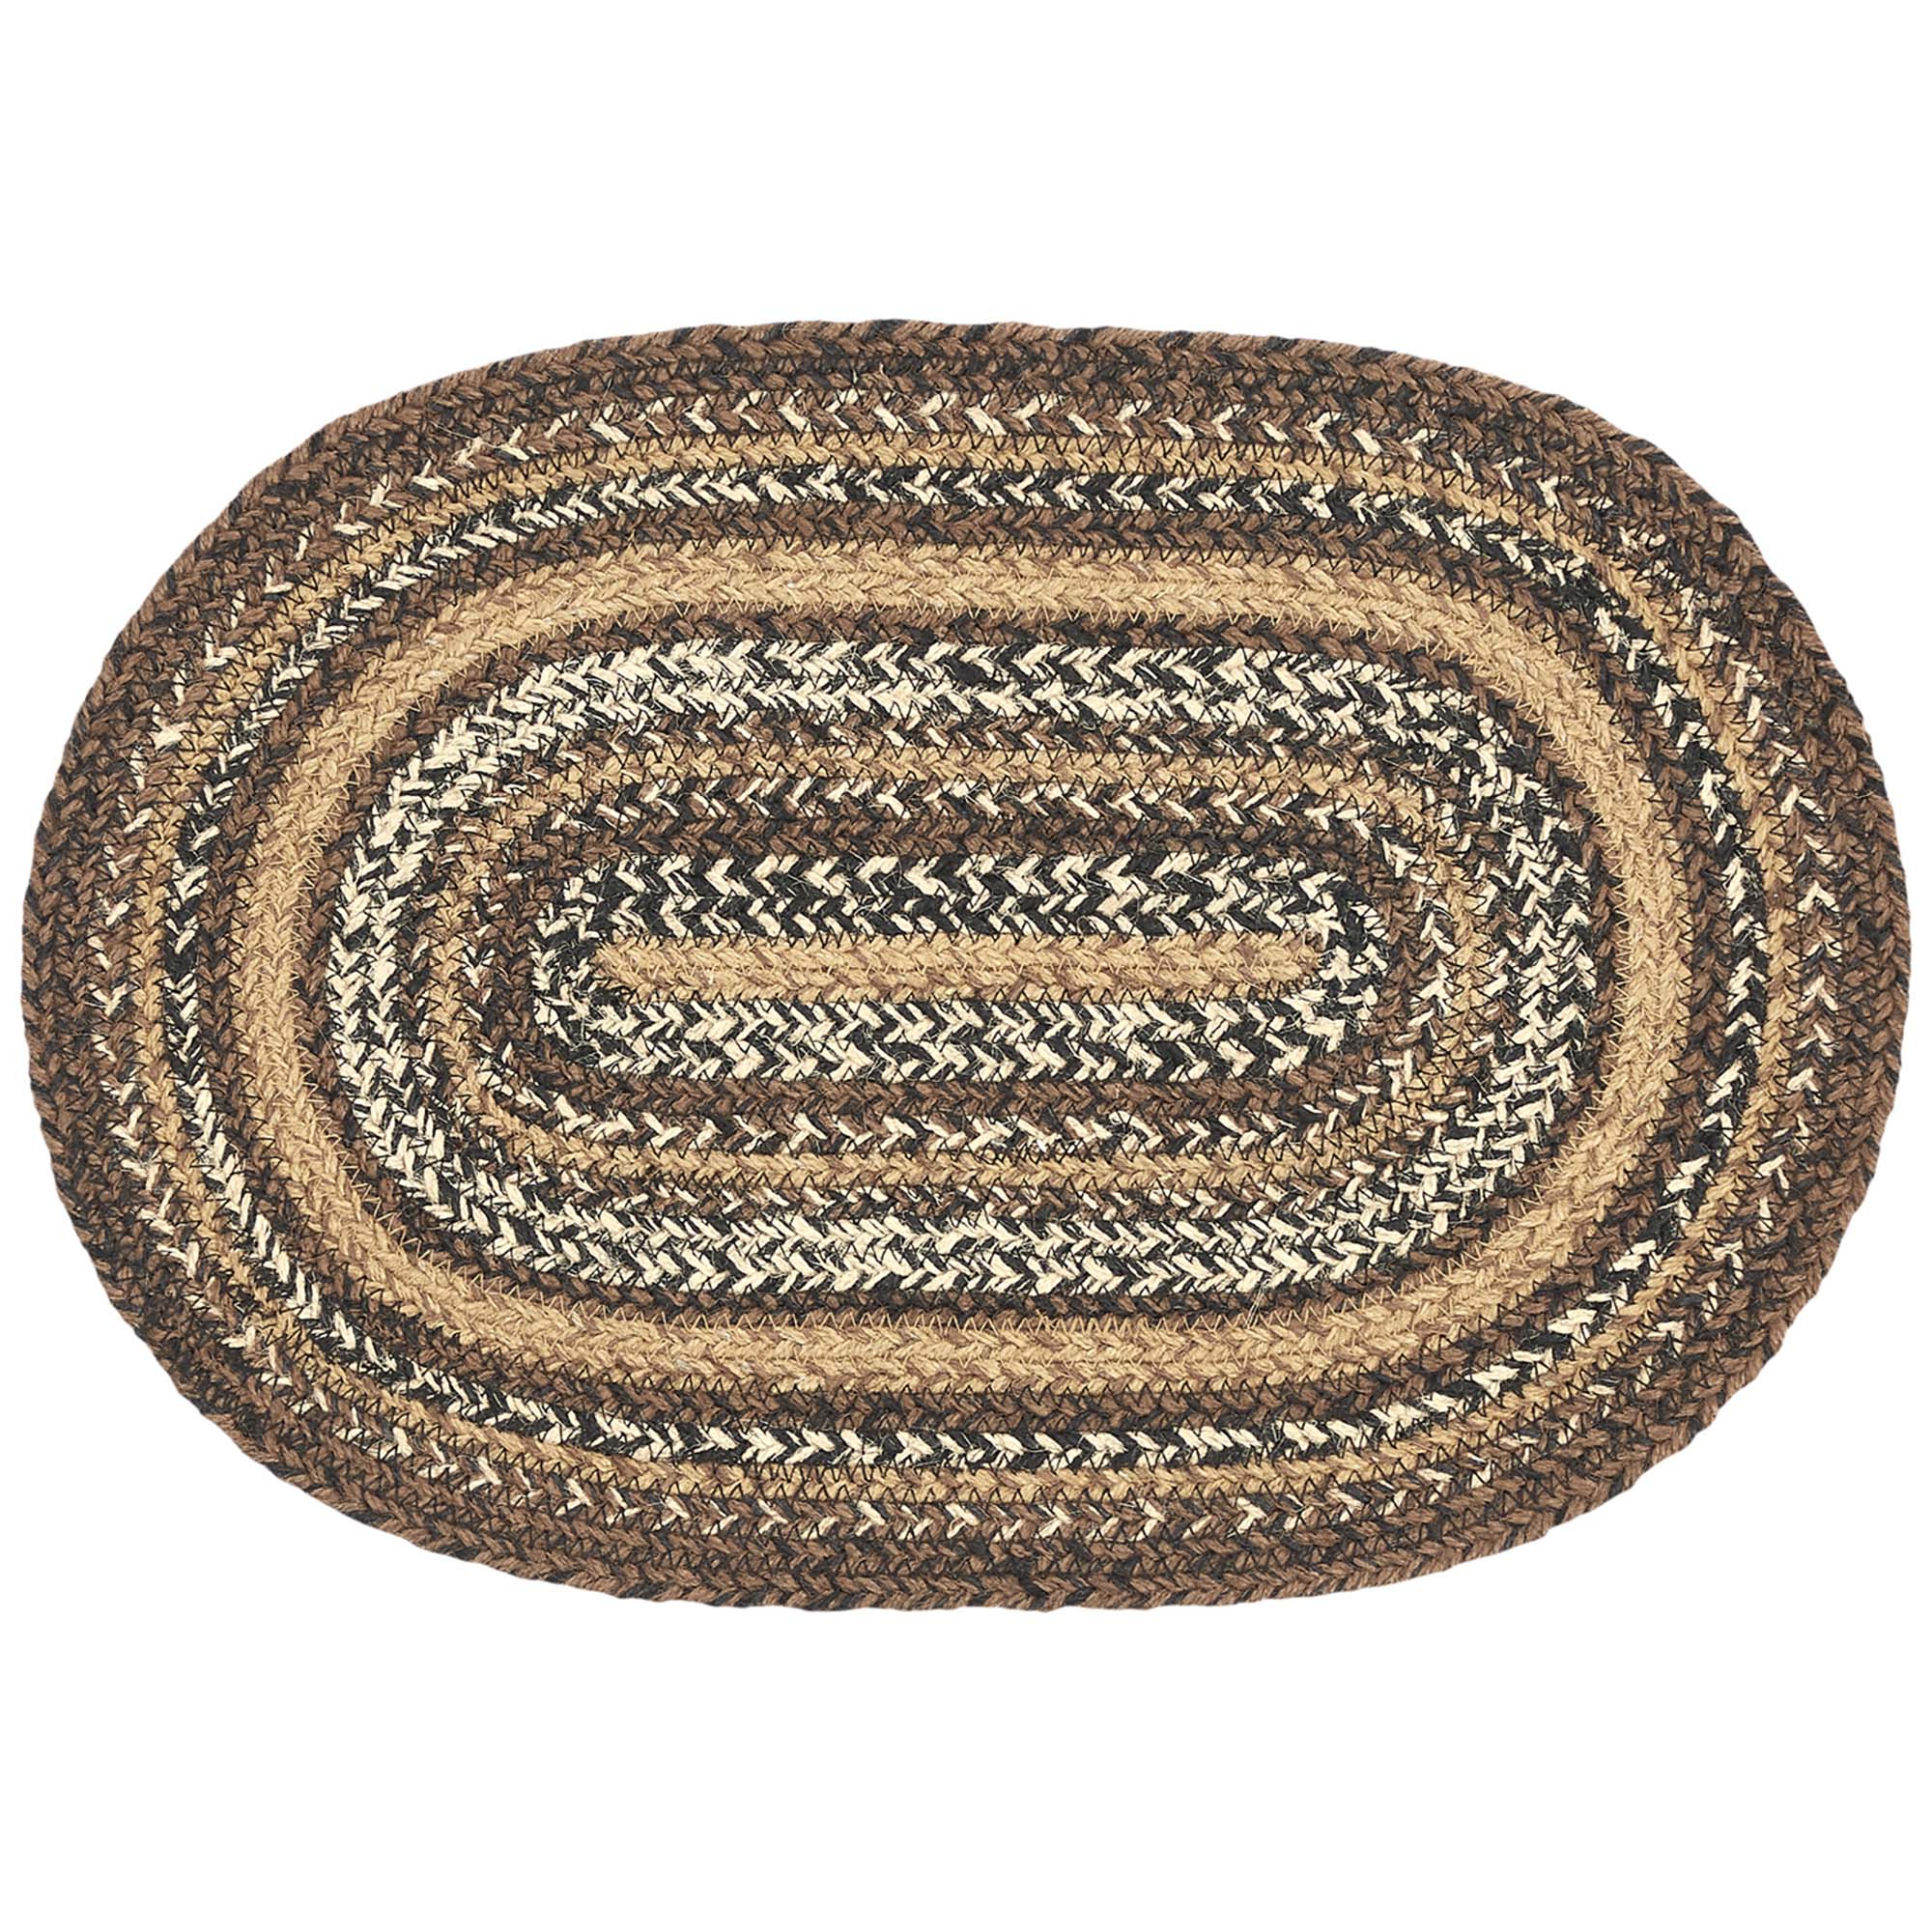 Espresso Jute Braided Oval Placemat 12"x18" VHC Brands